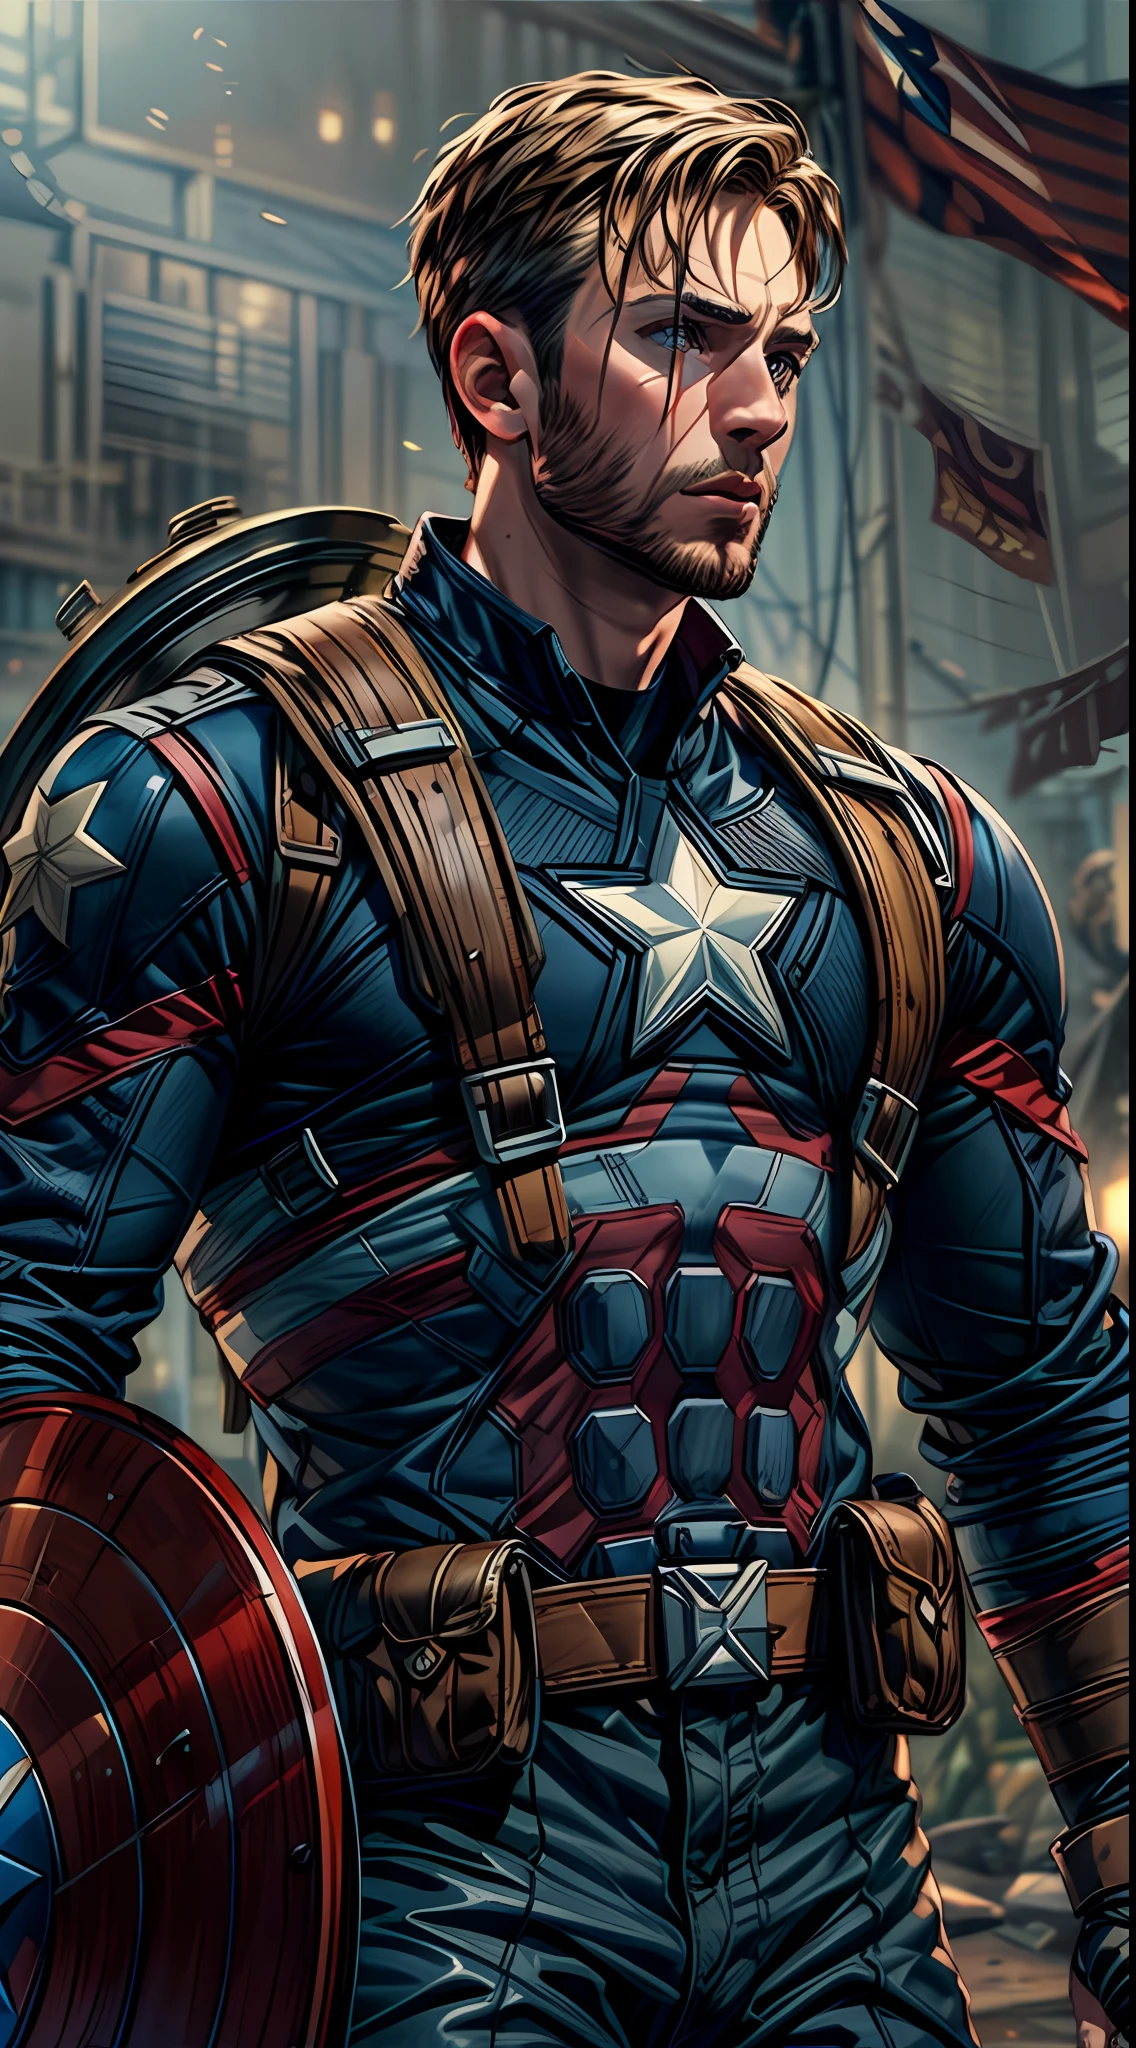 (RAW Photo, Best Quality), (Realistic, Photorealistic Photo: 1.3), Best Quality, Highly Detailed, Masterpiece, Ultra Detailed, Illustration, Marvel cinematic universe, marvel, Chris Evans, Steve Rogers as captain america, background should be epic, upper body, high detail on dress, Best Quality, Extremely Detailed CG Unified 8k Wallpaper, Ink, Amazing, badass look, portrait, close up (skin texture), intricately detailed, fine details, hyperdetailed.